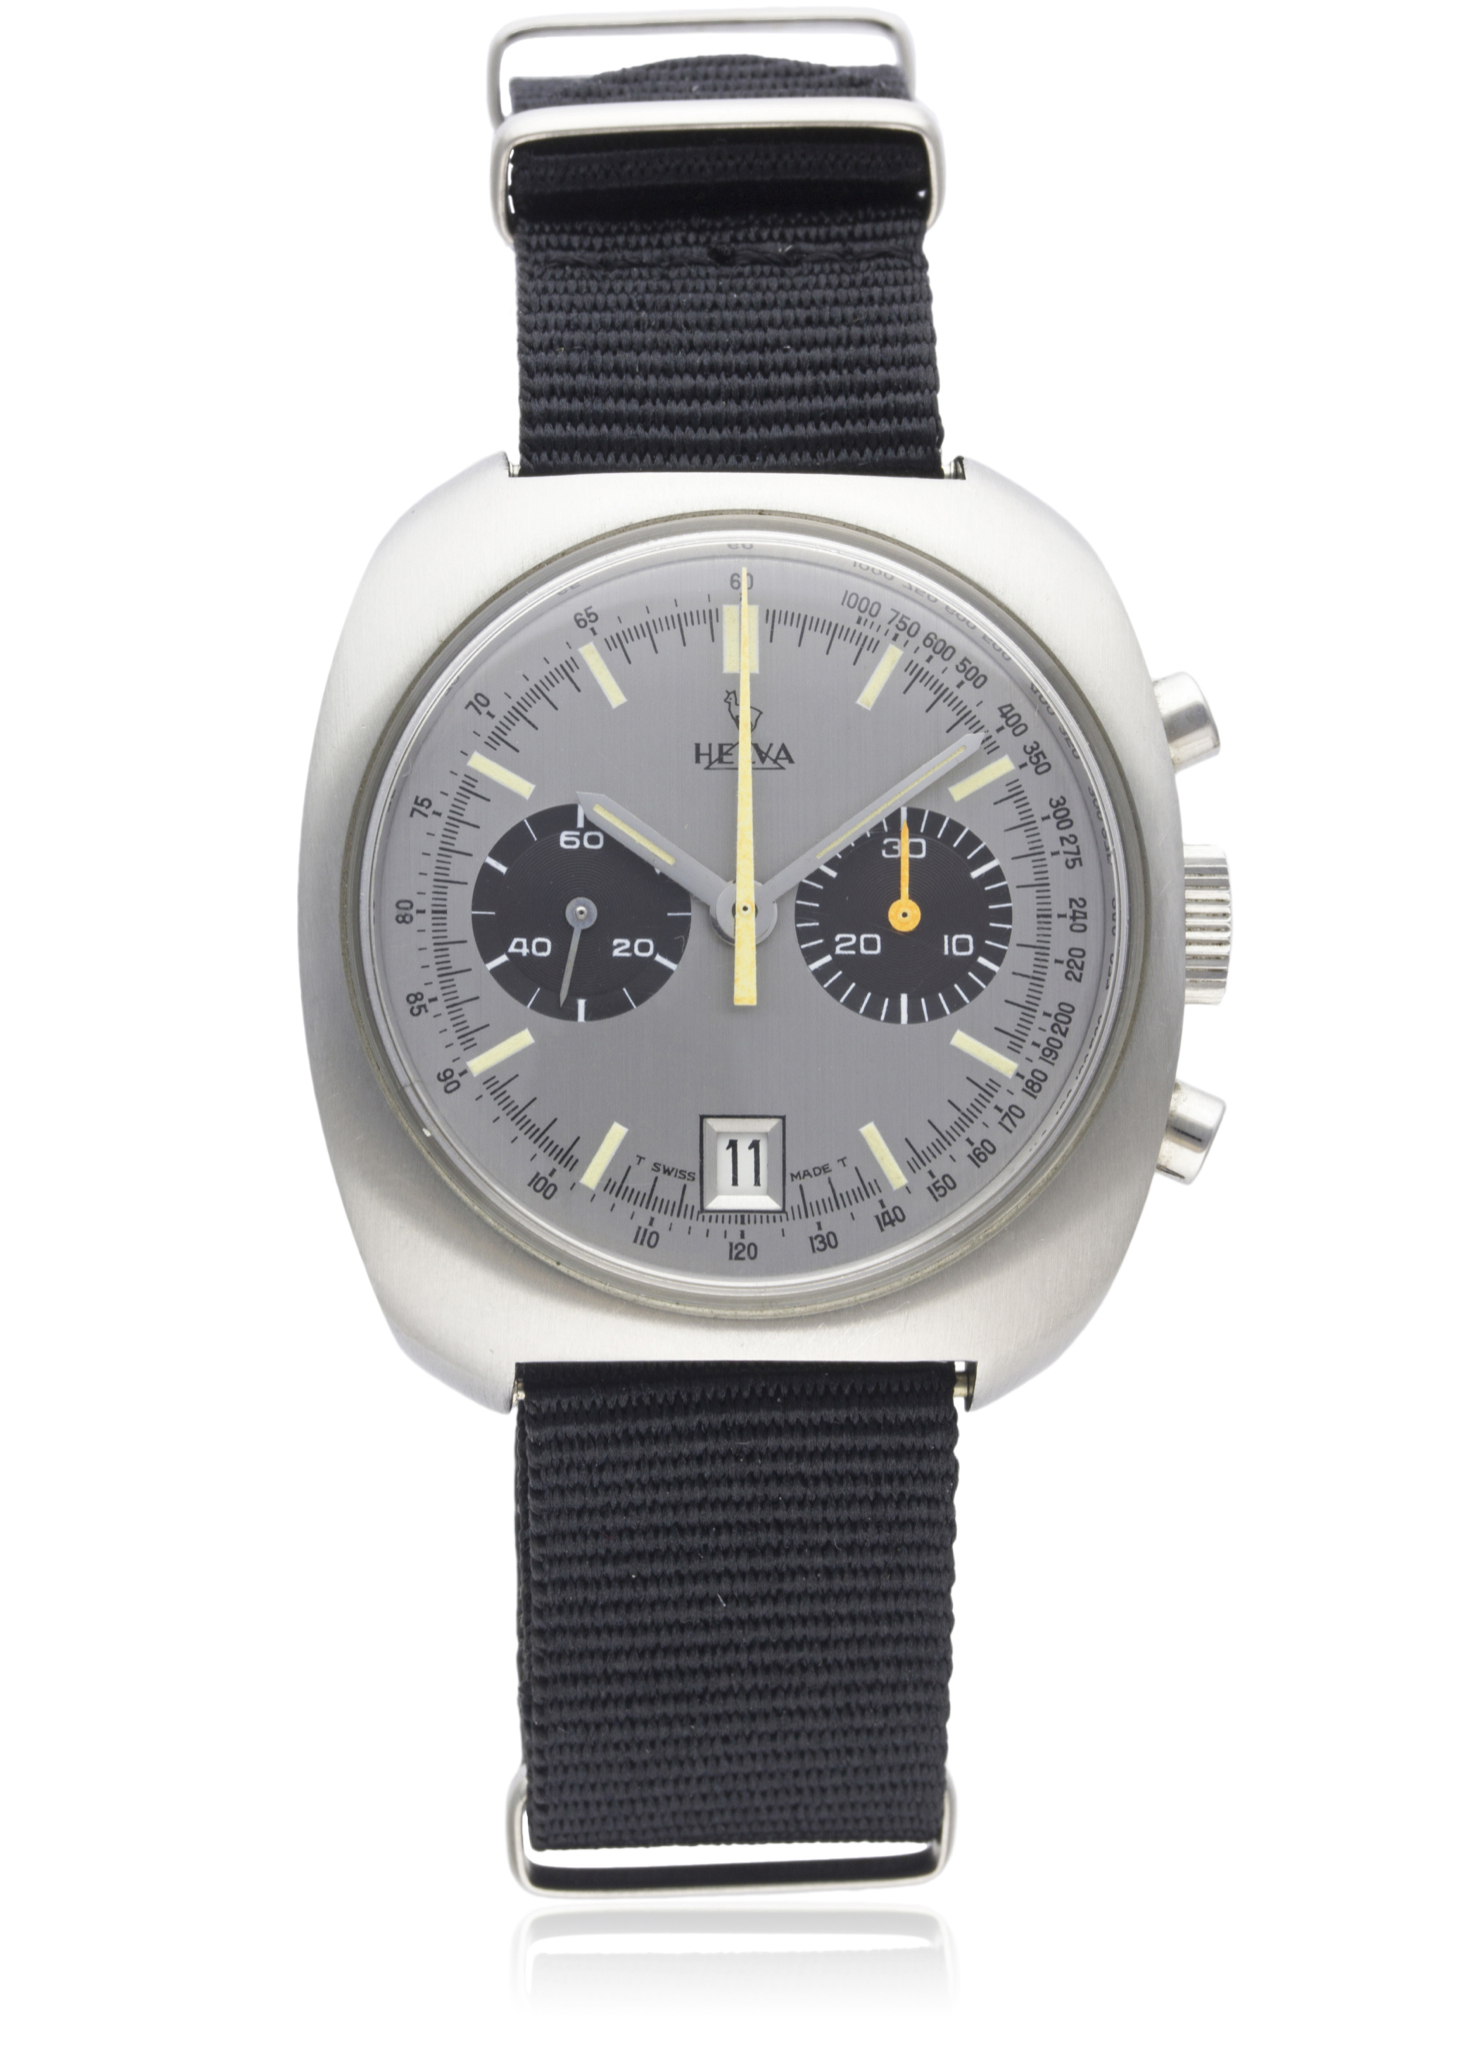 A GENTLEMAN'S STAINLESS STEEL HELVA CHRONOGRAPH WRIST WATCH CIRCA 1960s, REF. 9704 D: Brushed silver